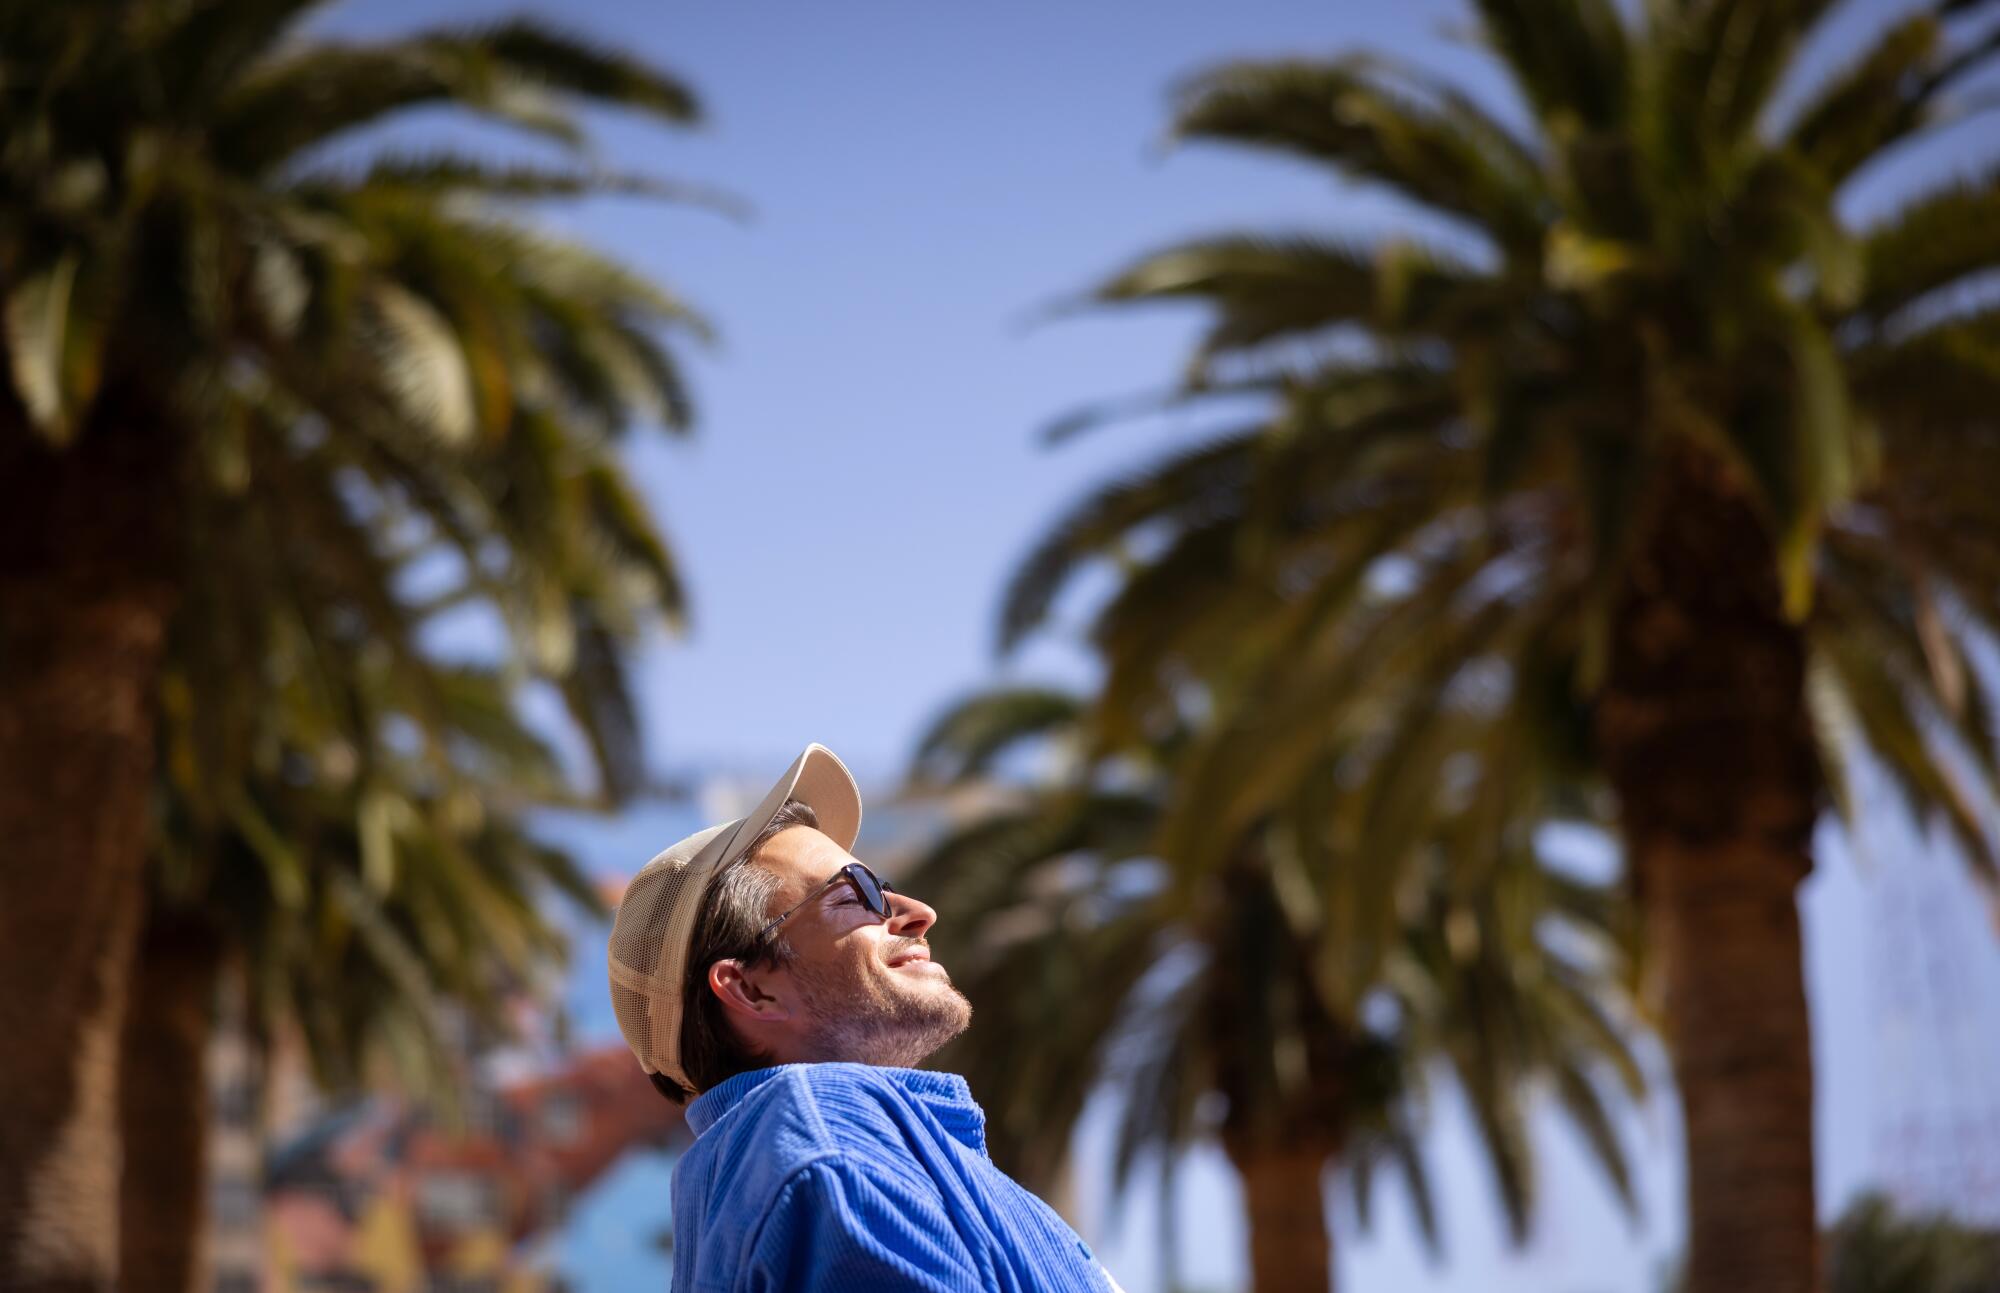 A man in a hat sunbathes with palm trees behind him.